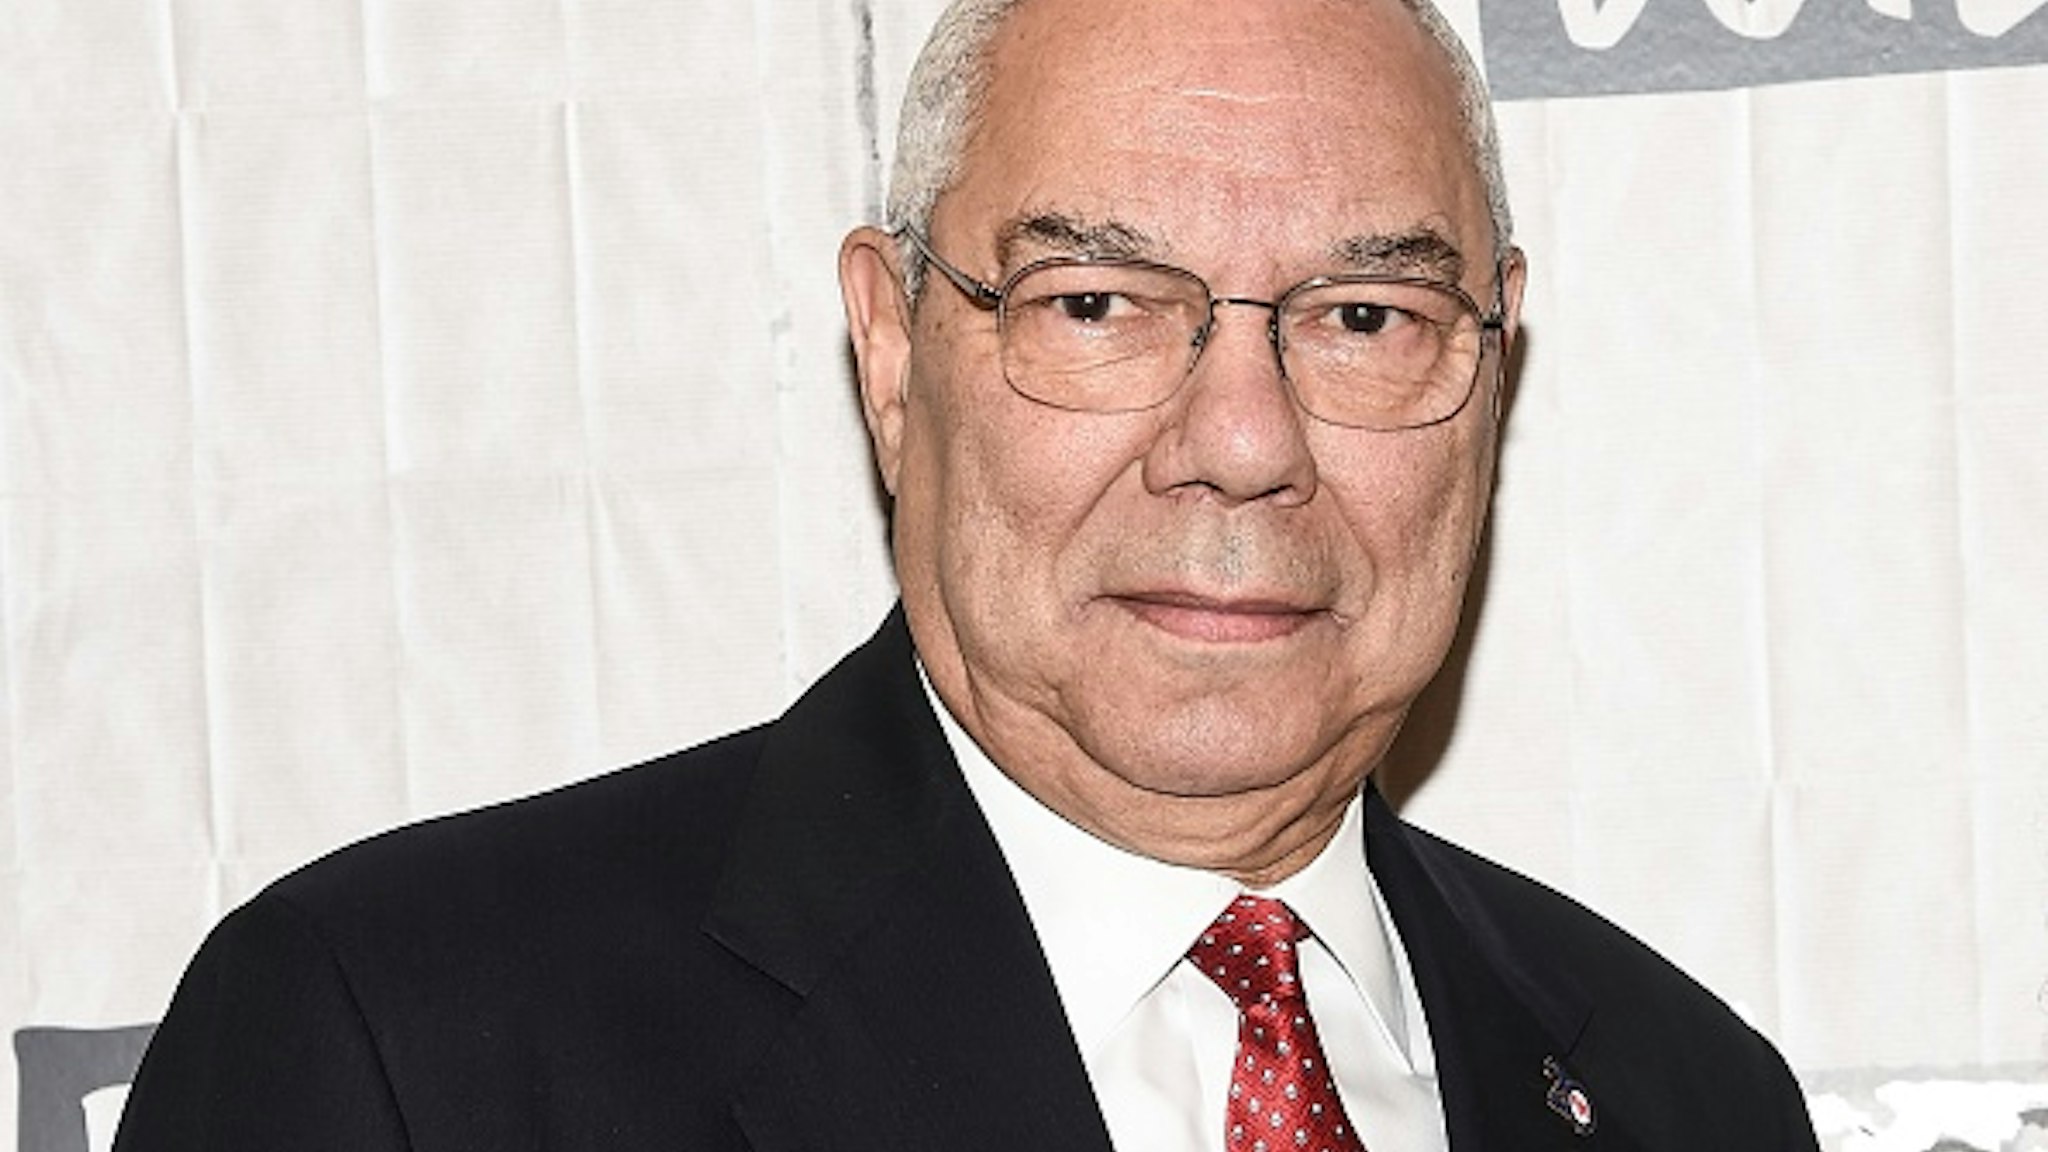 NEW YORK, NY - APRIL 17: General Colin Powell attends the Build Series to discuss his newest mission with America's Promise to 'Recommit 2 Kids' campaign at Build Studio on April 17, 2017 in New York City.